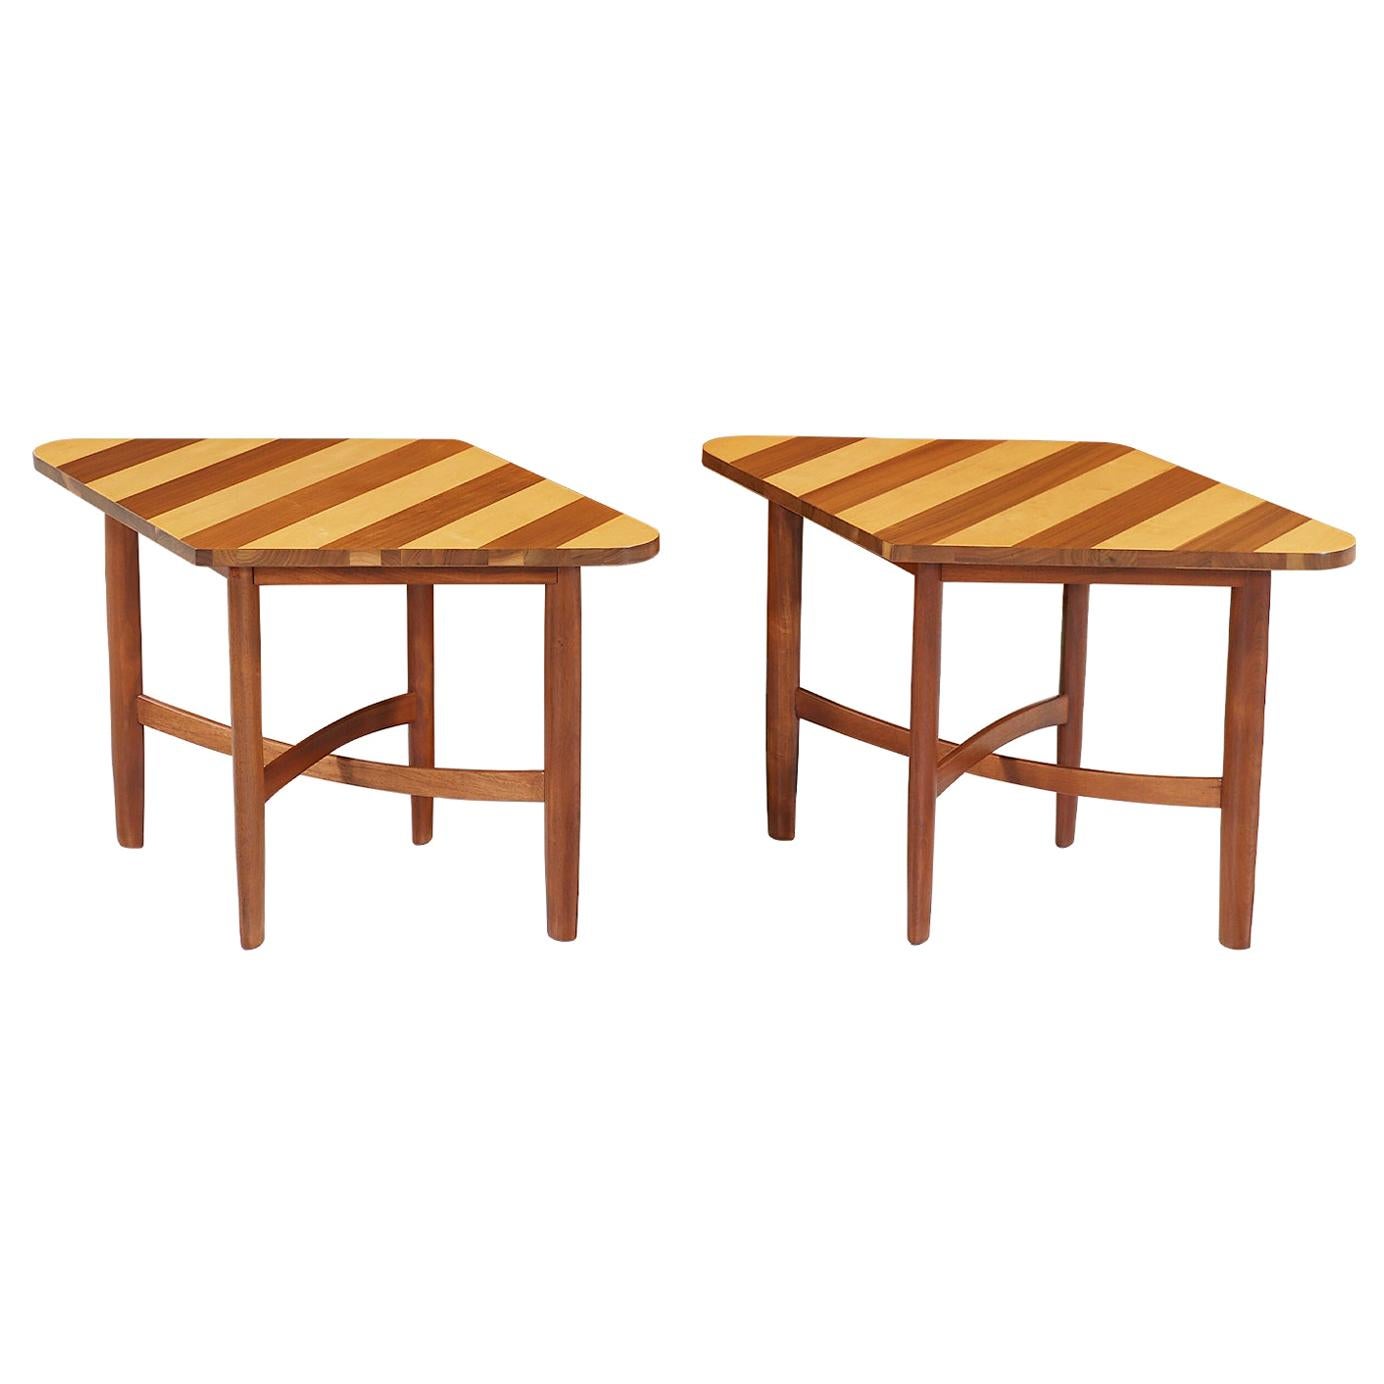 Expertly Restored - Barney Flagg "Parallel" Multi-Wood Side Tables for Drexel